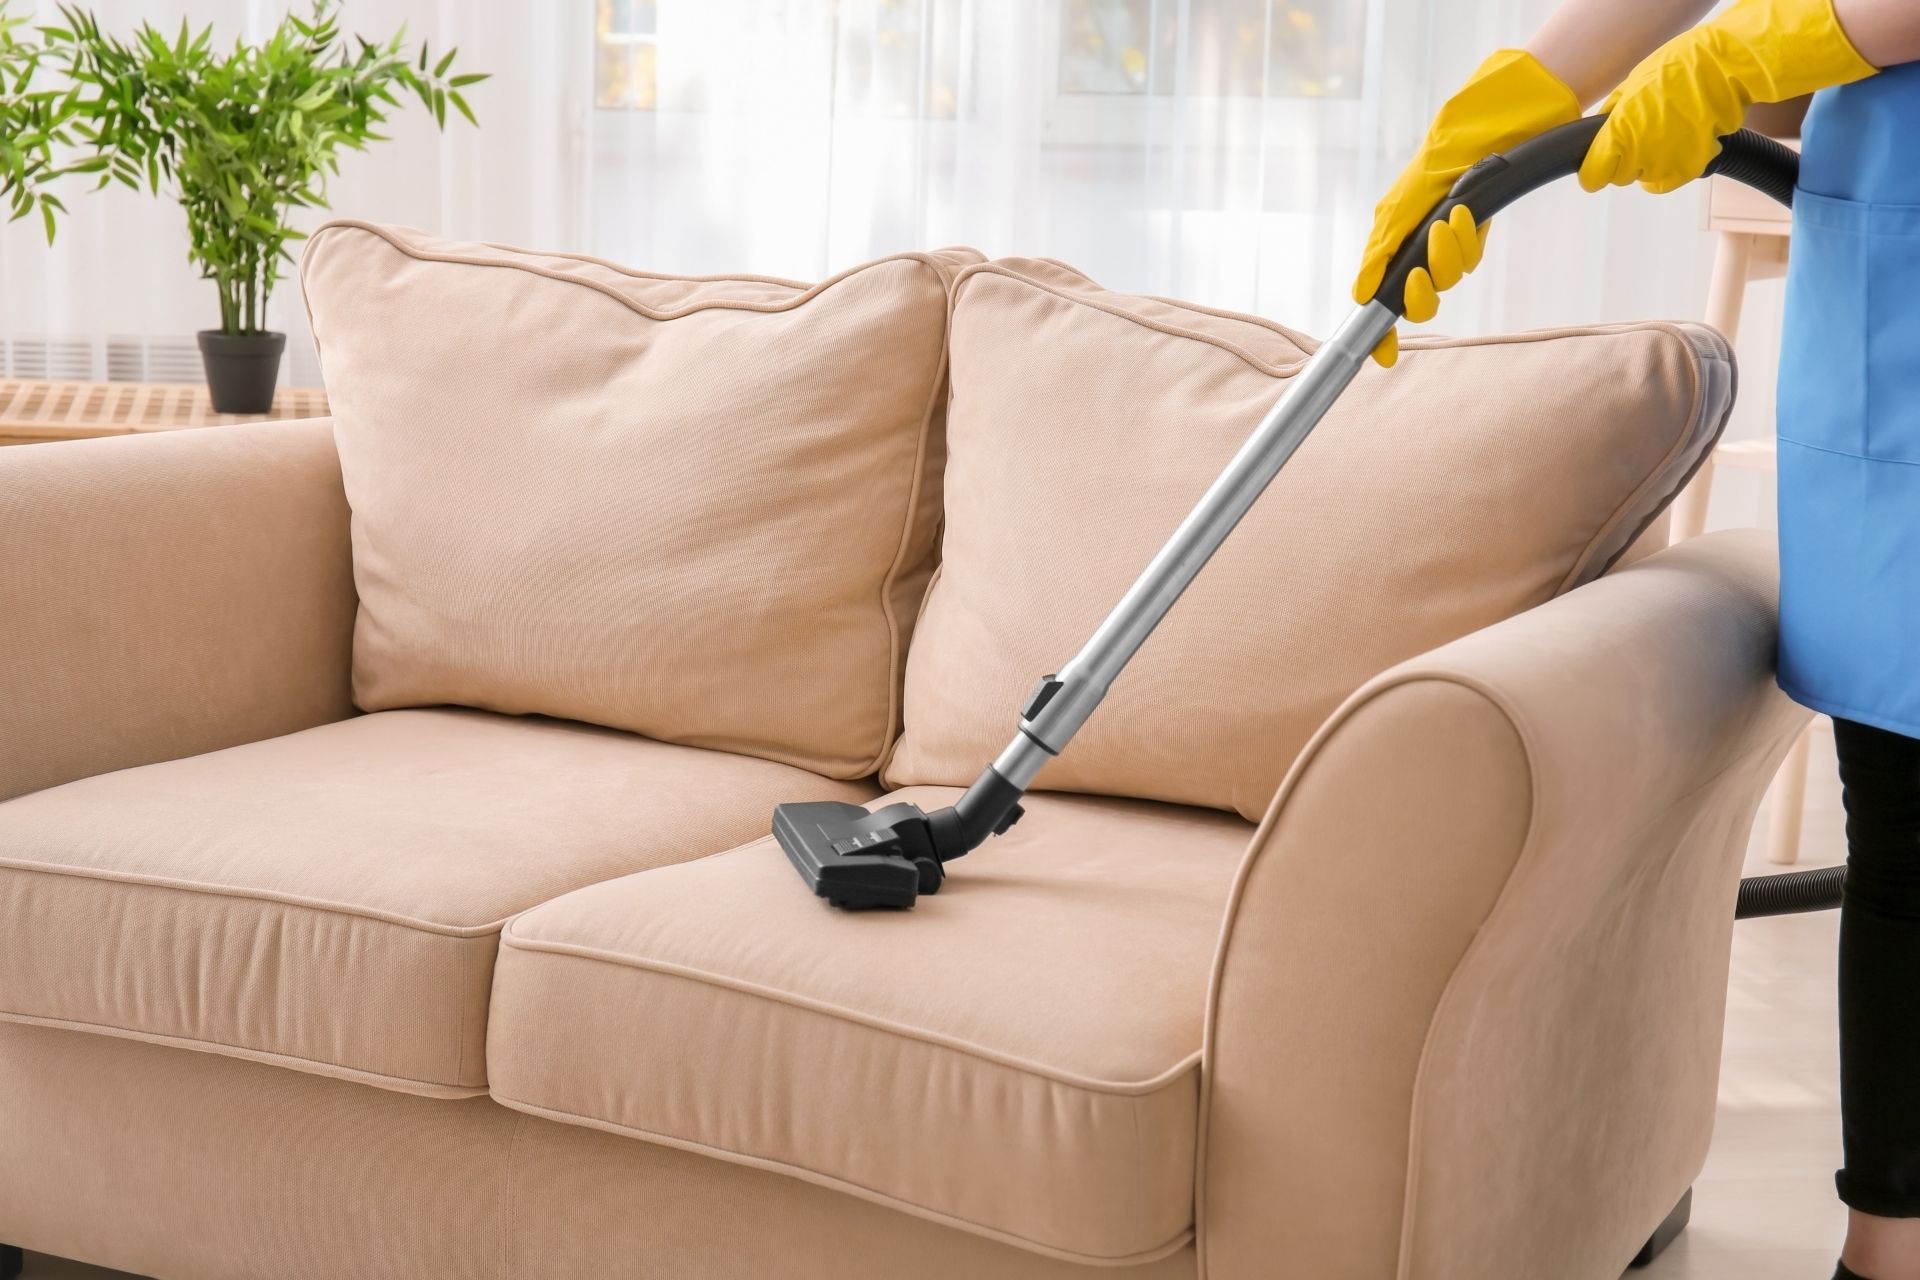 professionally cleaning a beige couch